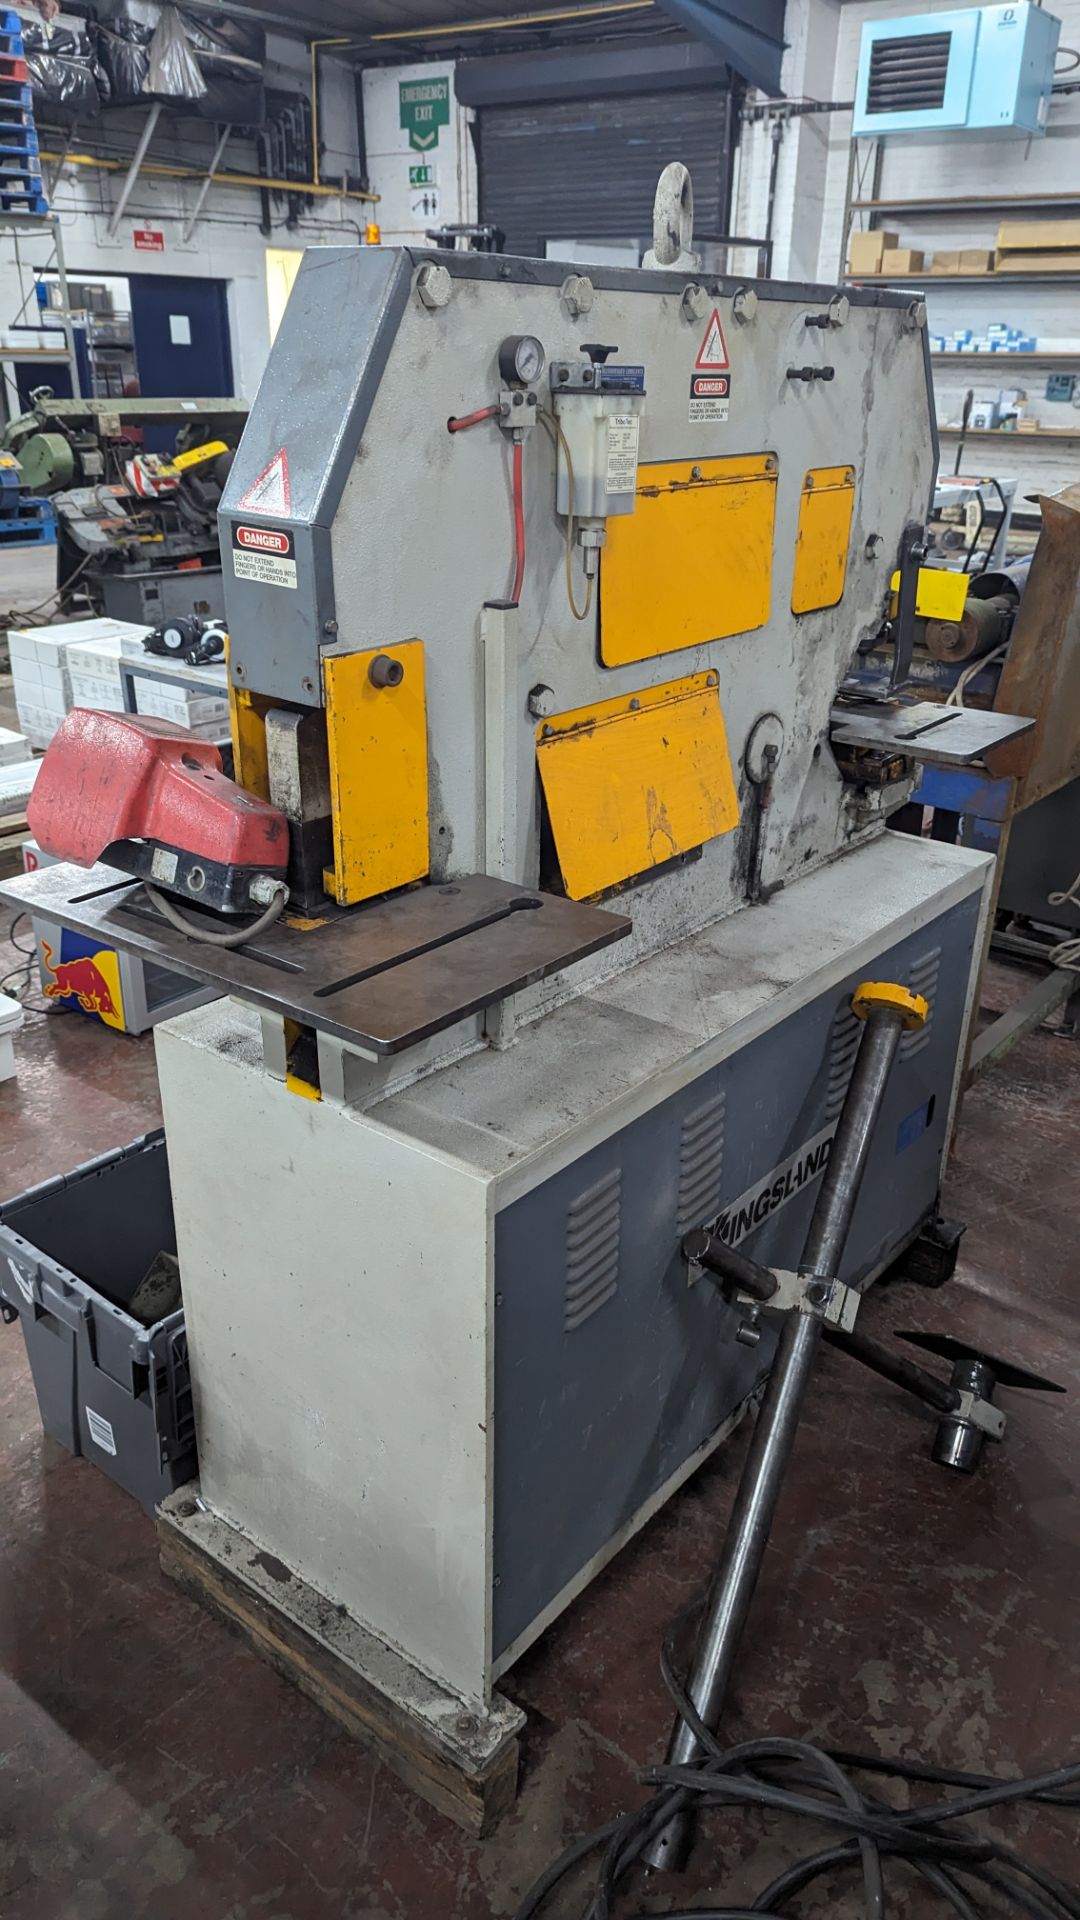 Kingsland Compact 60 hydraulic metalworker for punching, shearing, angle cutting, section cutting an - Image 9 of 22